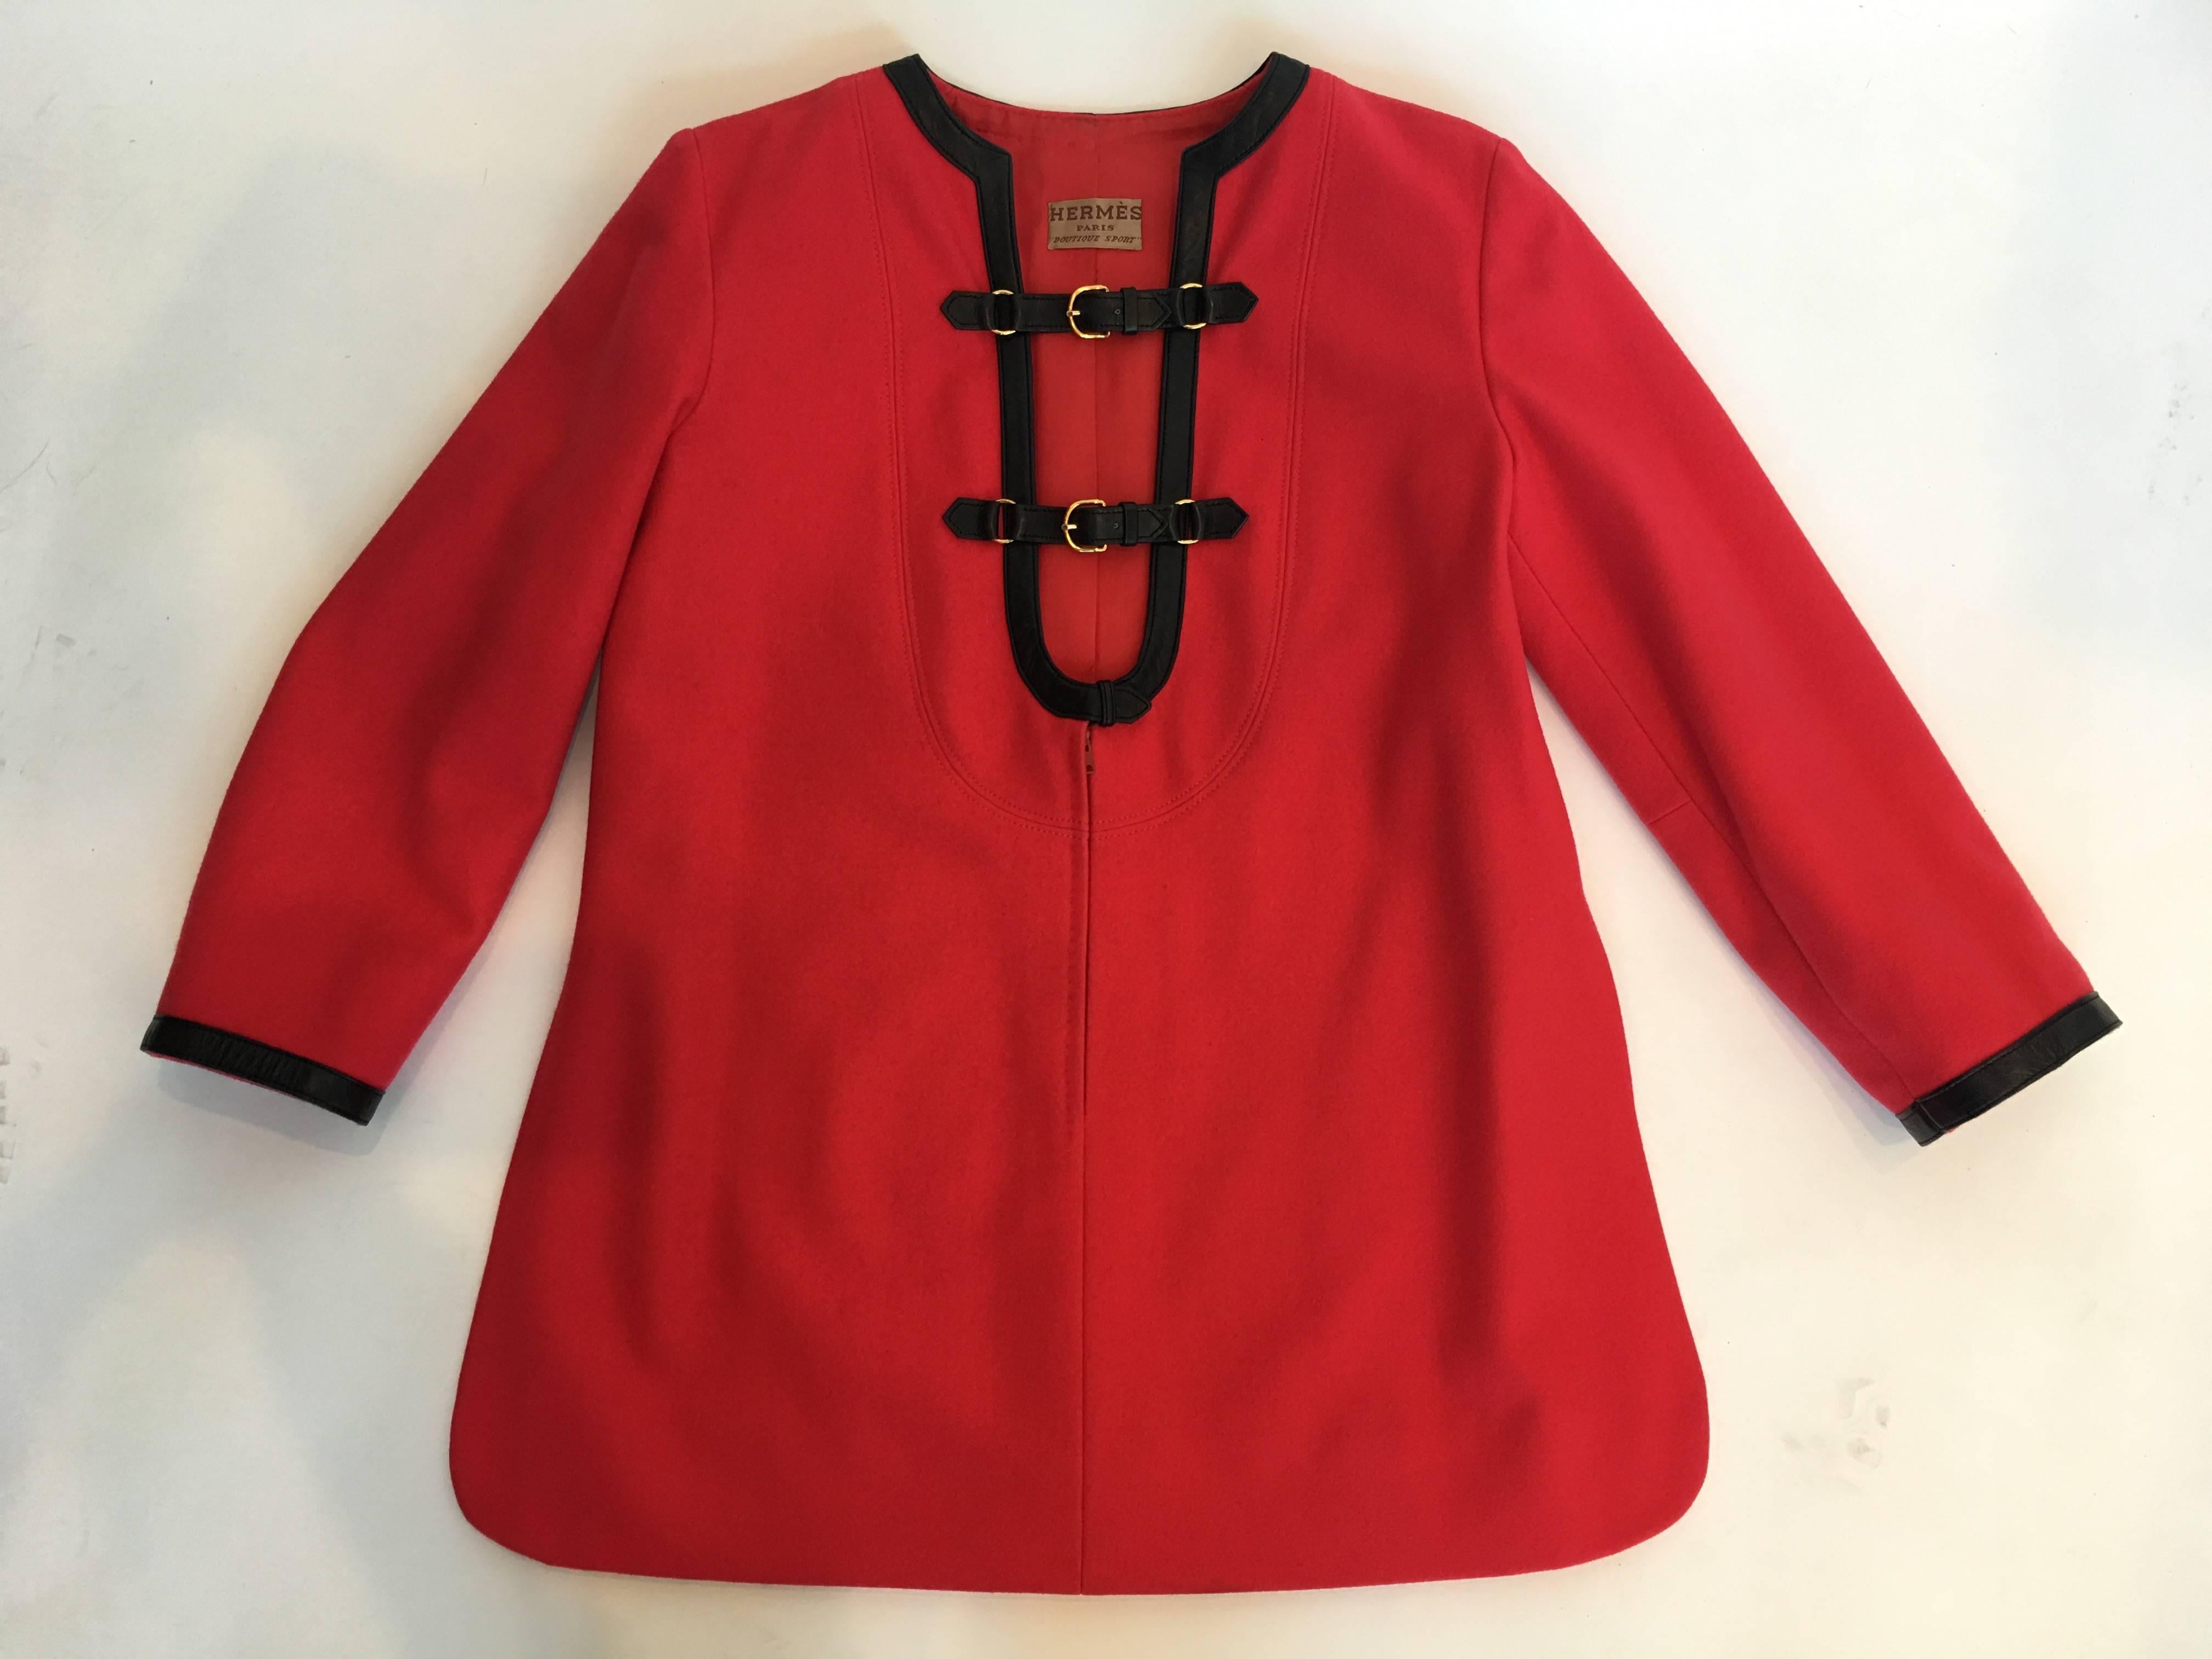 Hermes 1970's Crimson Red Tunic Top with Black Leather Strapping For Sale 2